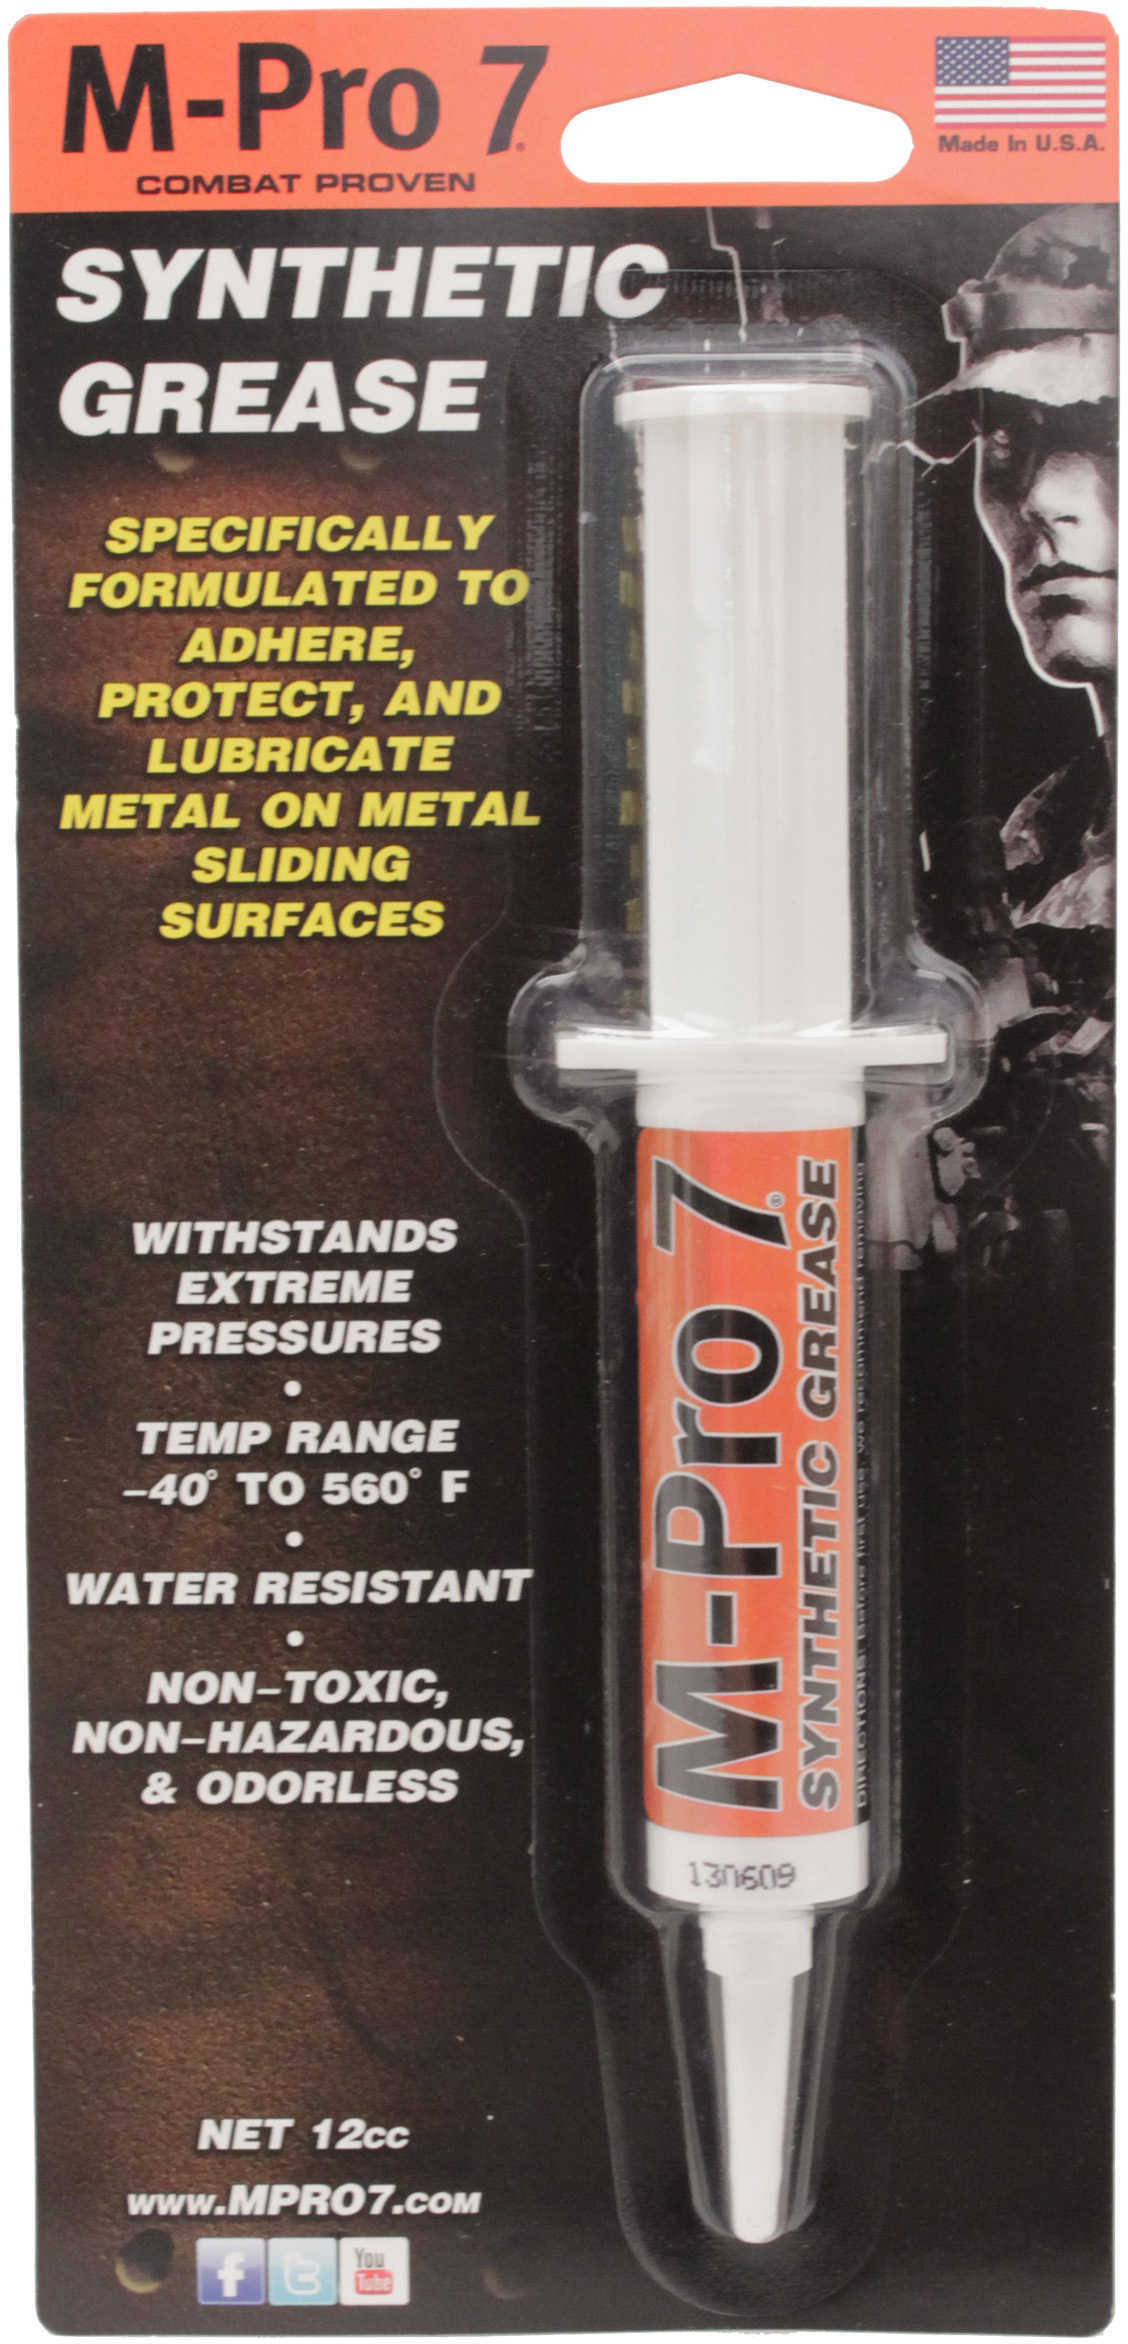 M-Pro 7 Synthetic Grease